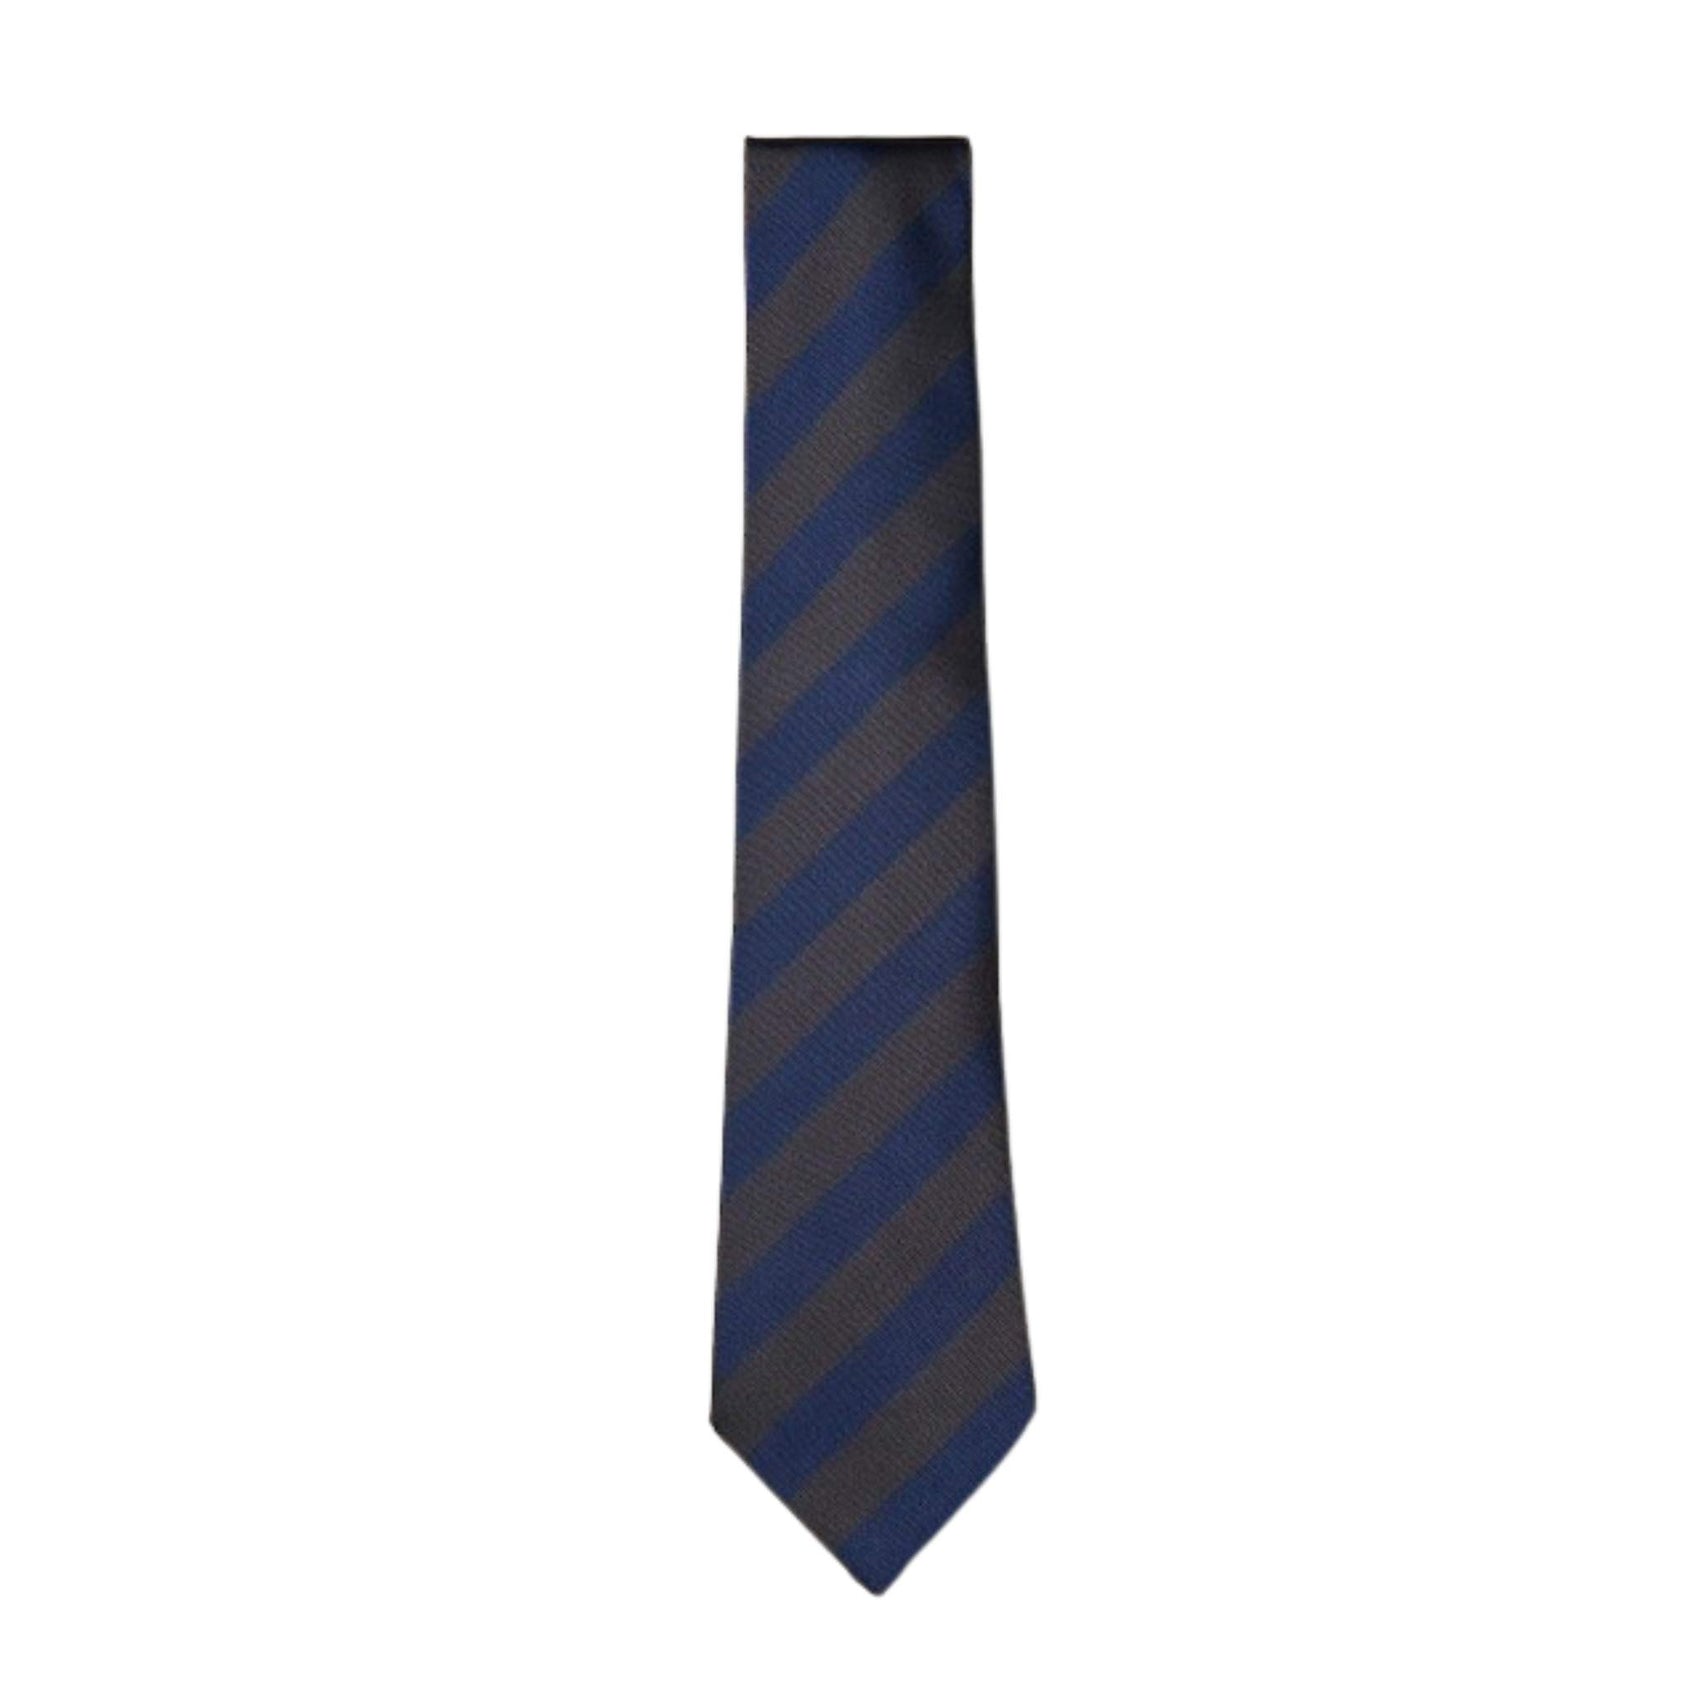 Brown and Navy stripe tie